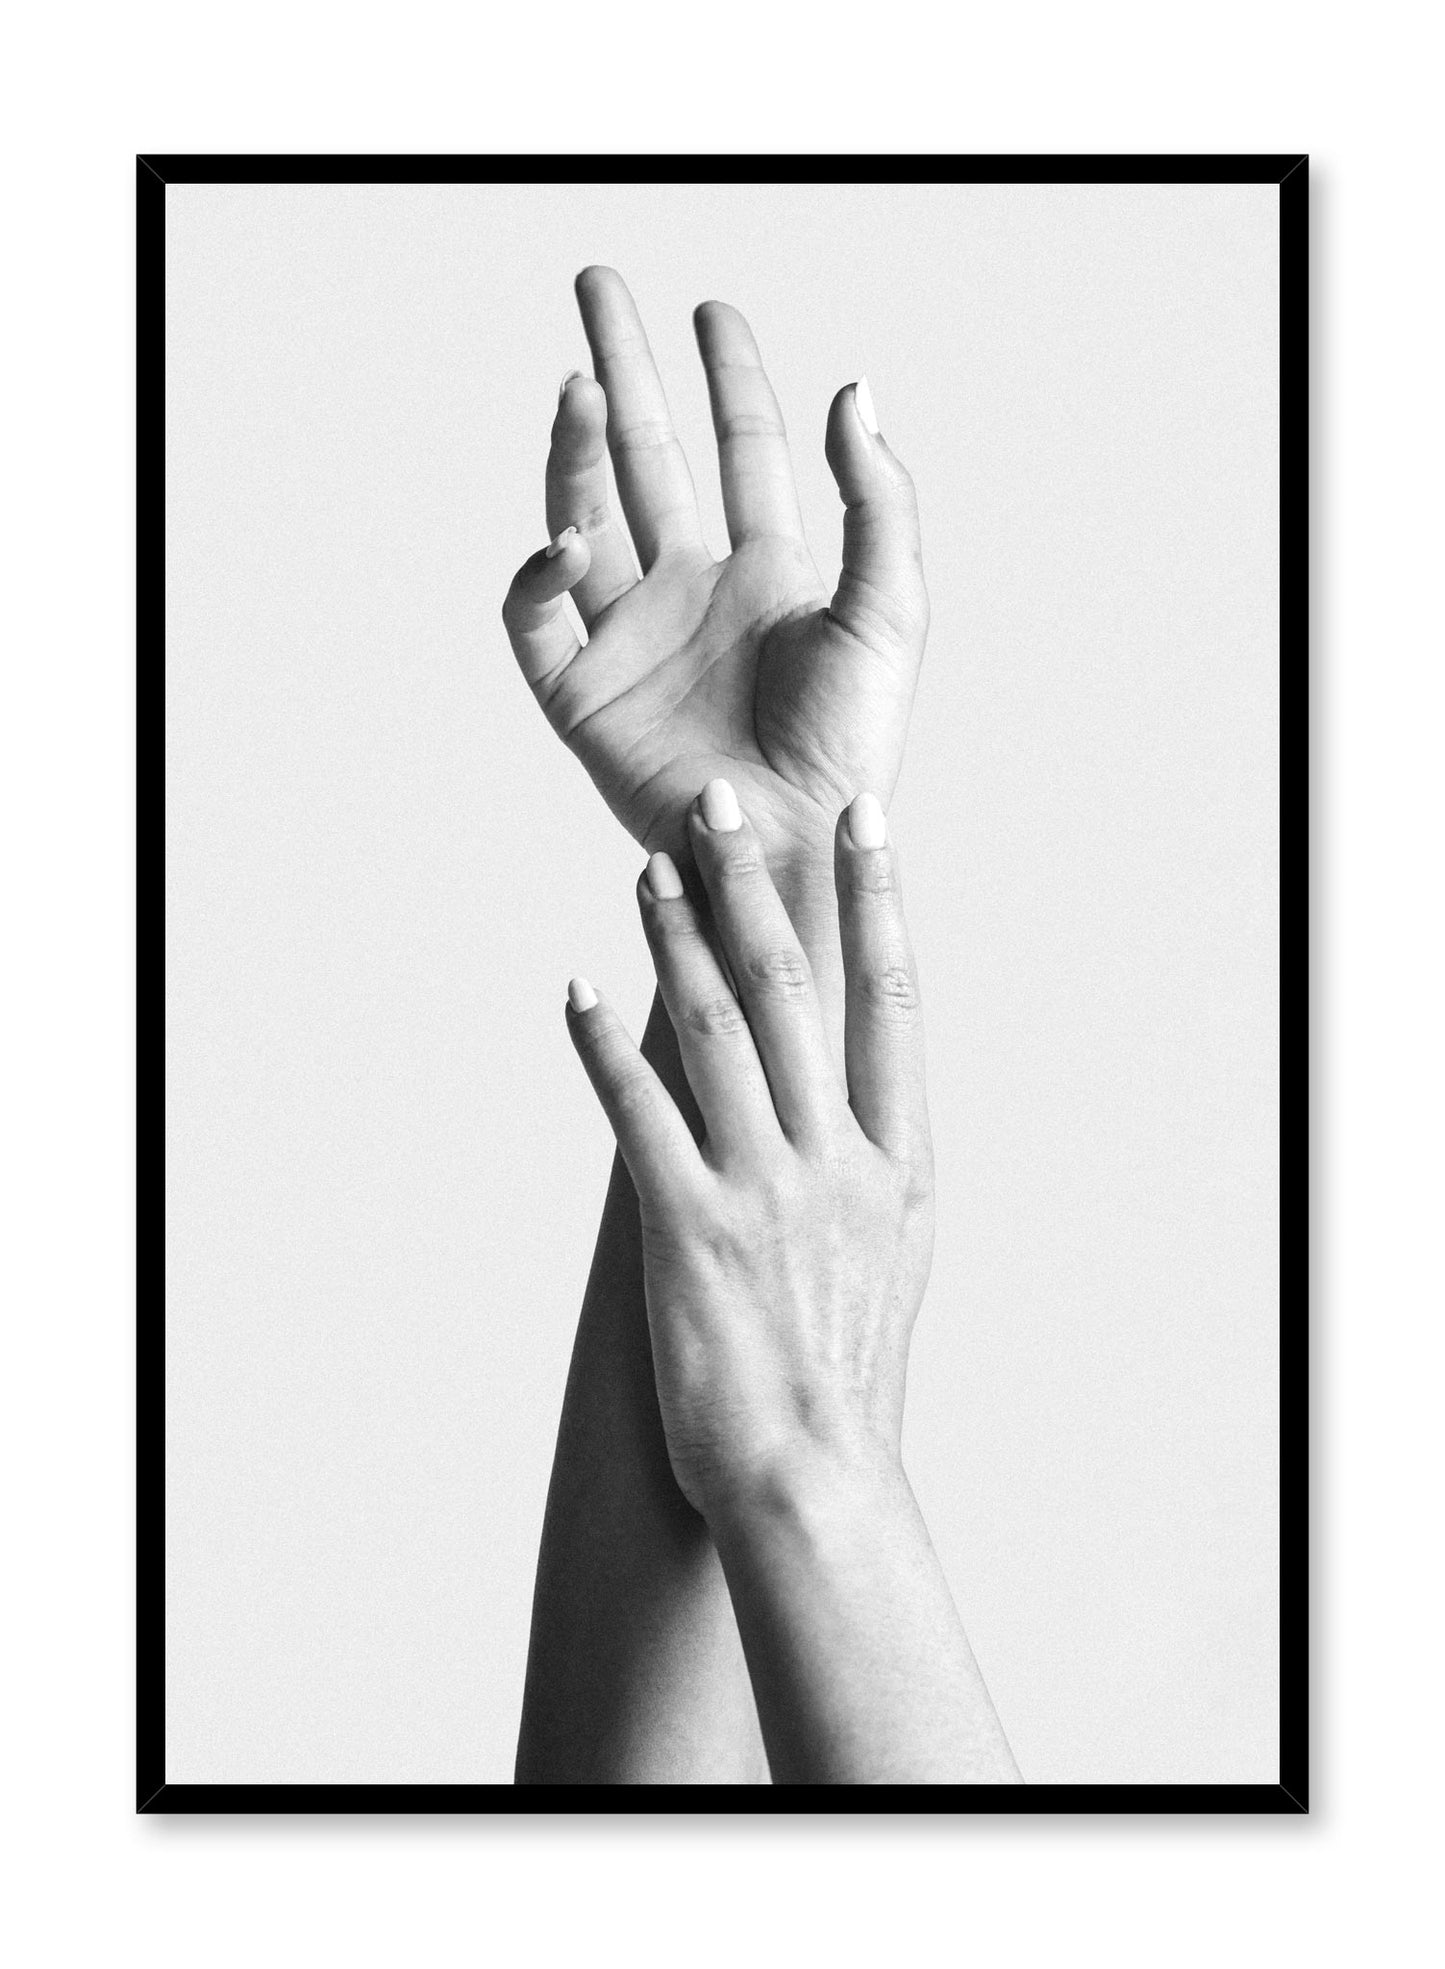 Black and white fashion photography poster by Opposite Wall with hands reaching